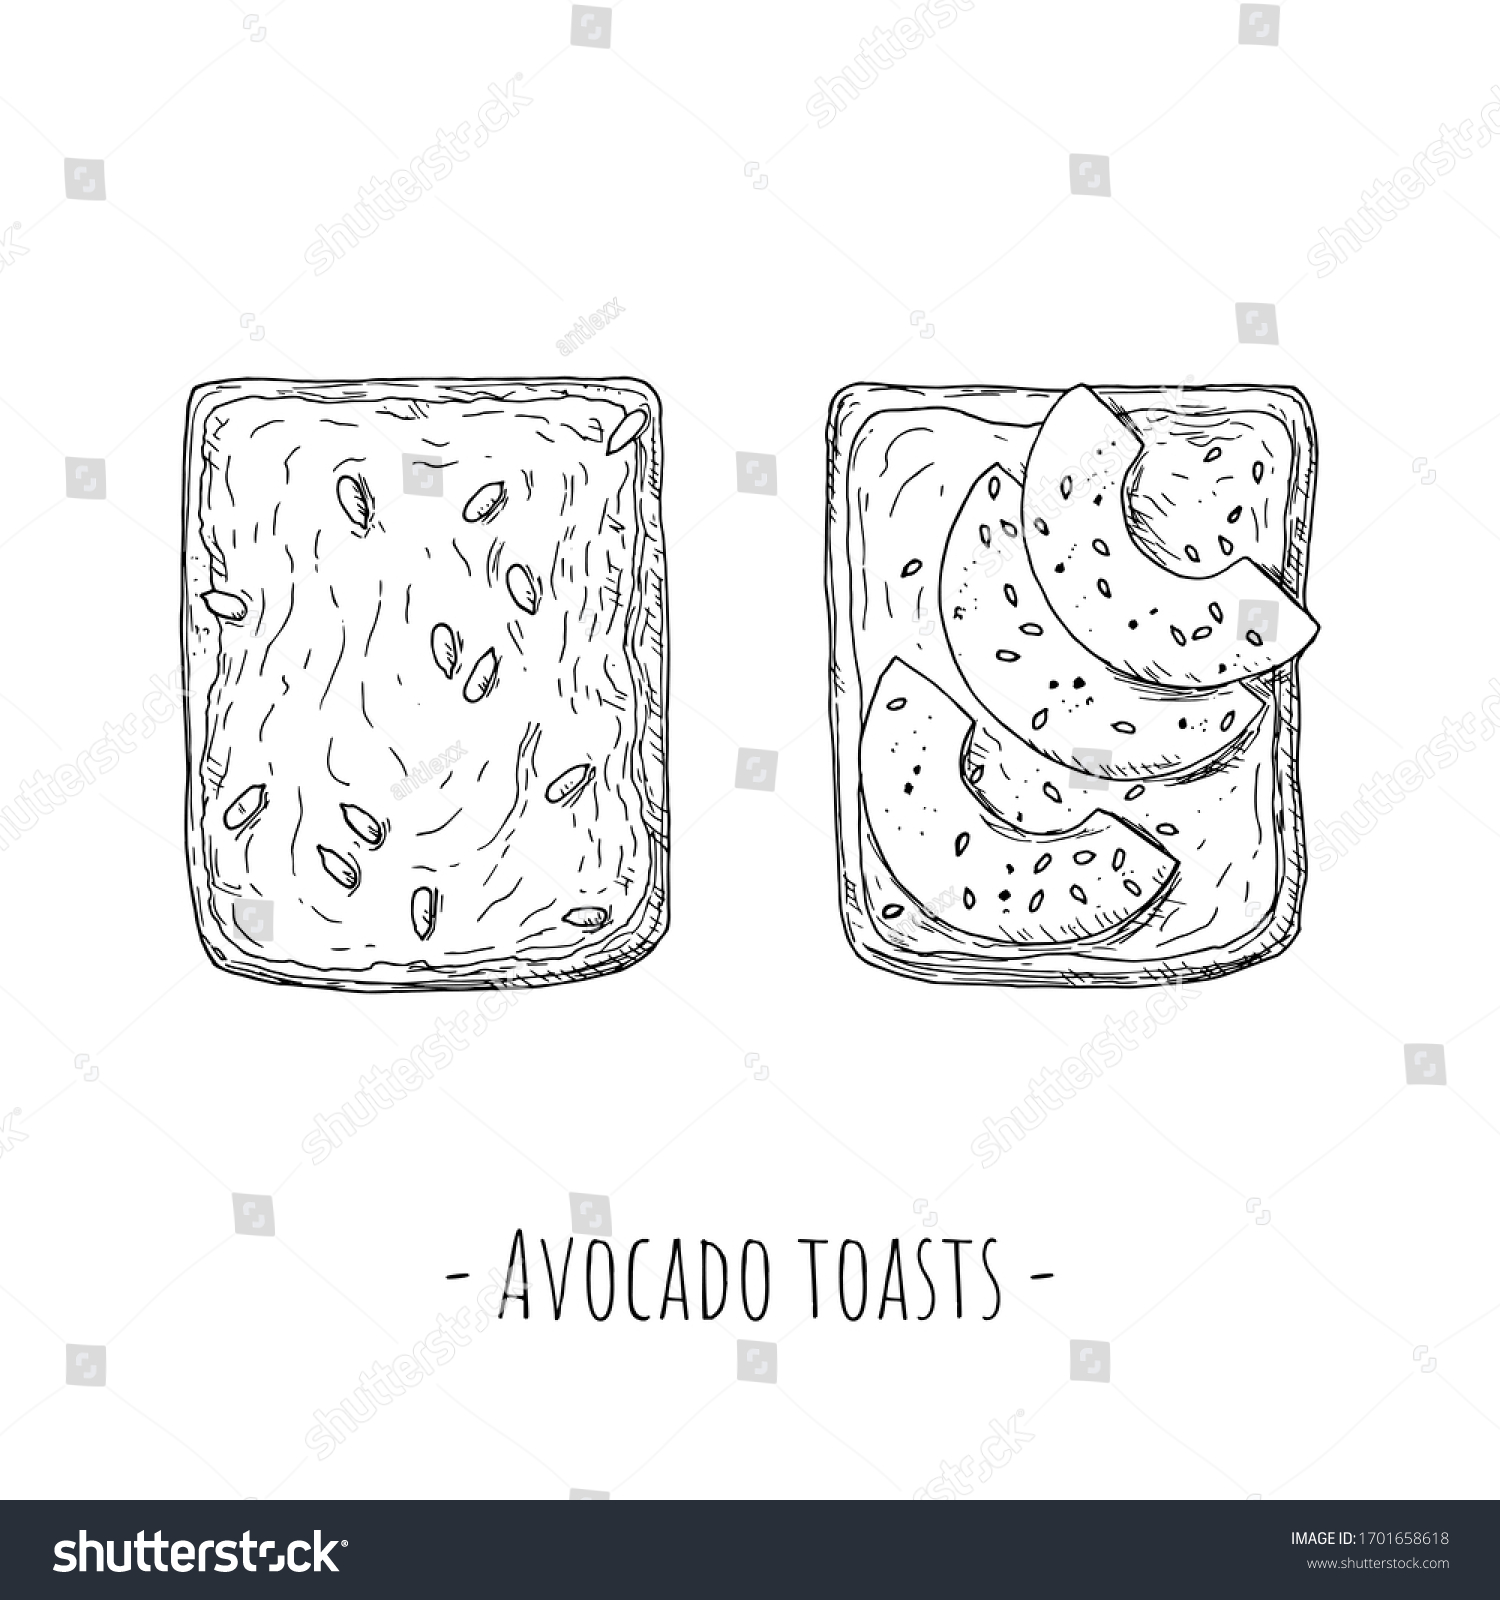 SVG of Avocado toasts. Top view. Hand-drawn style. Isolated objects on a white background. Vector cartoon illustrations. svg